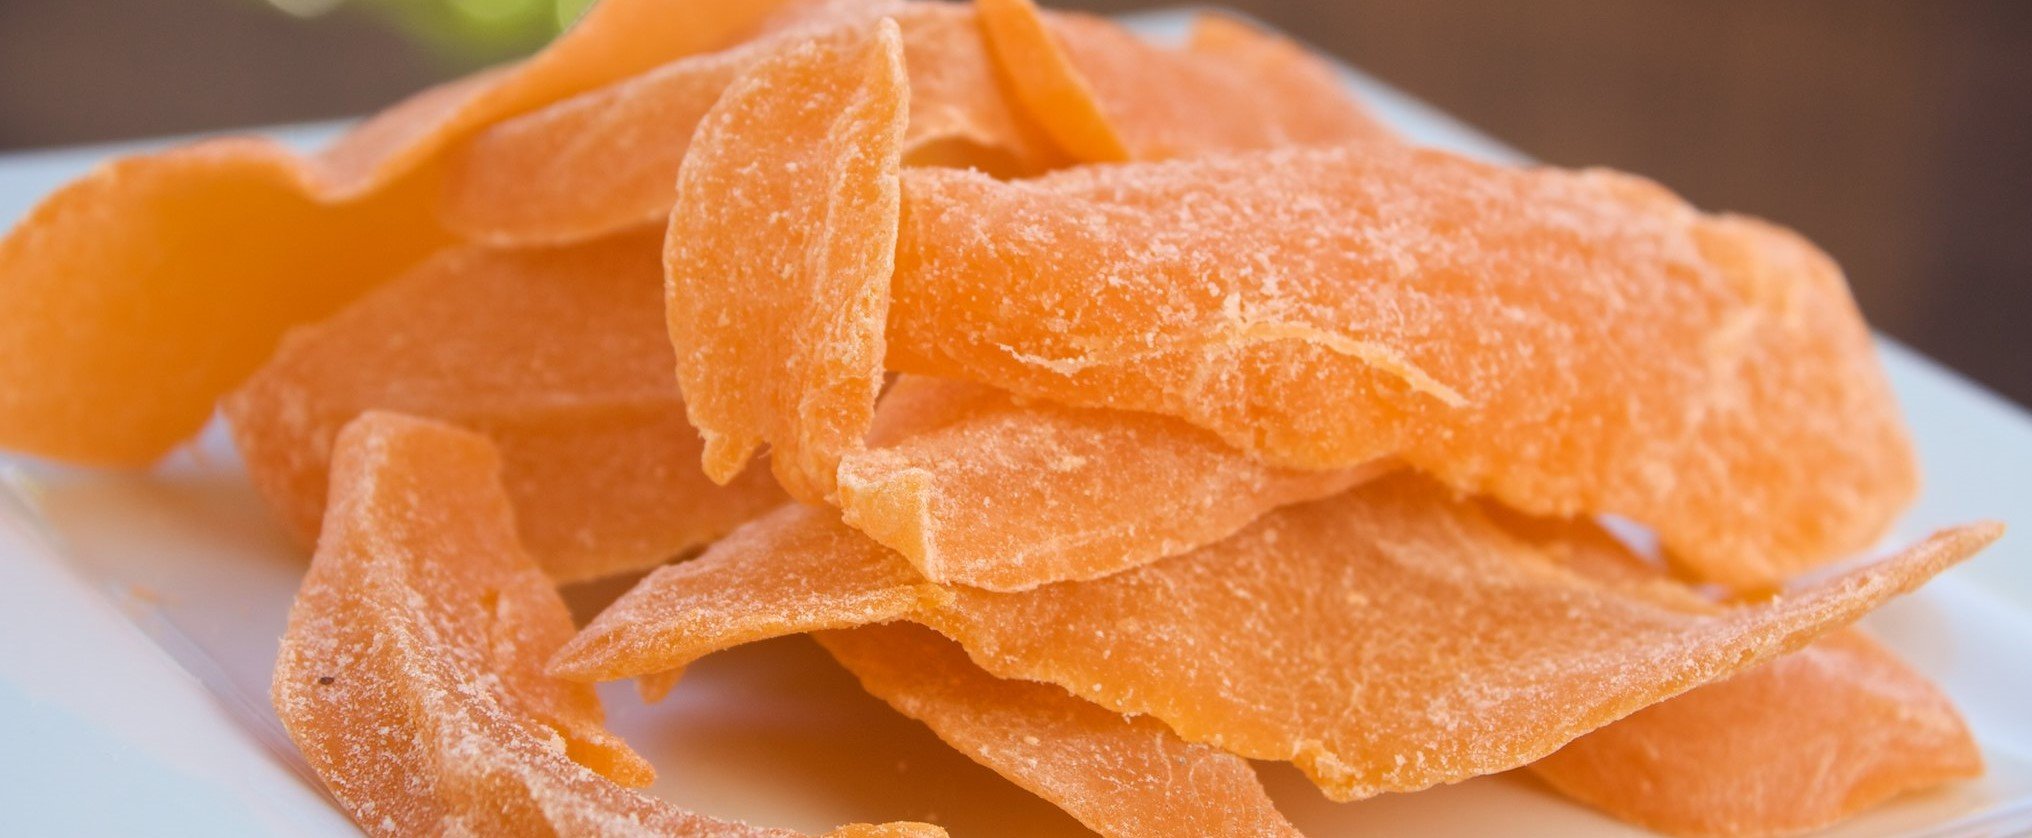 While fruit is healthy, how about dried fruit? Eh, not really.